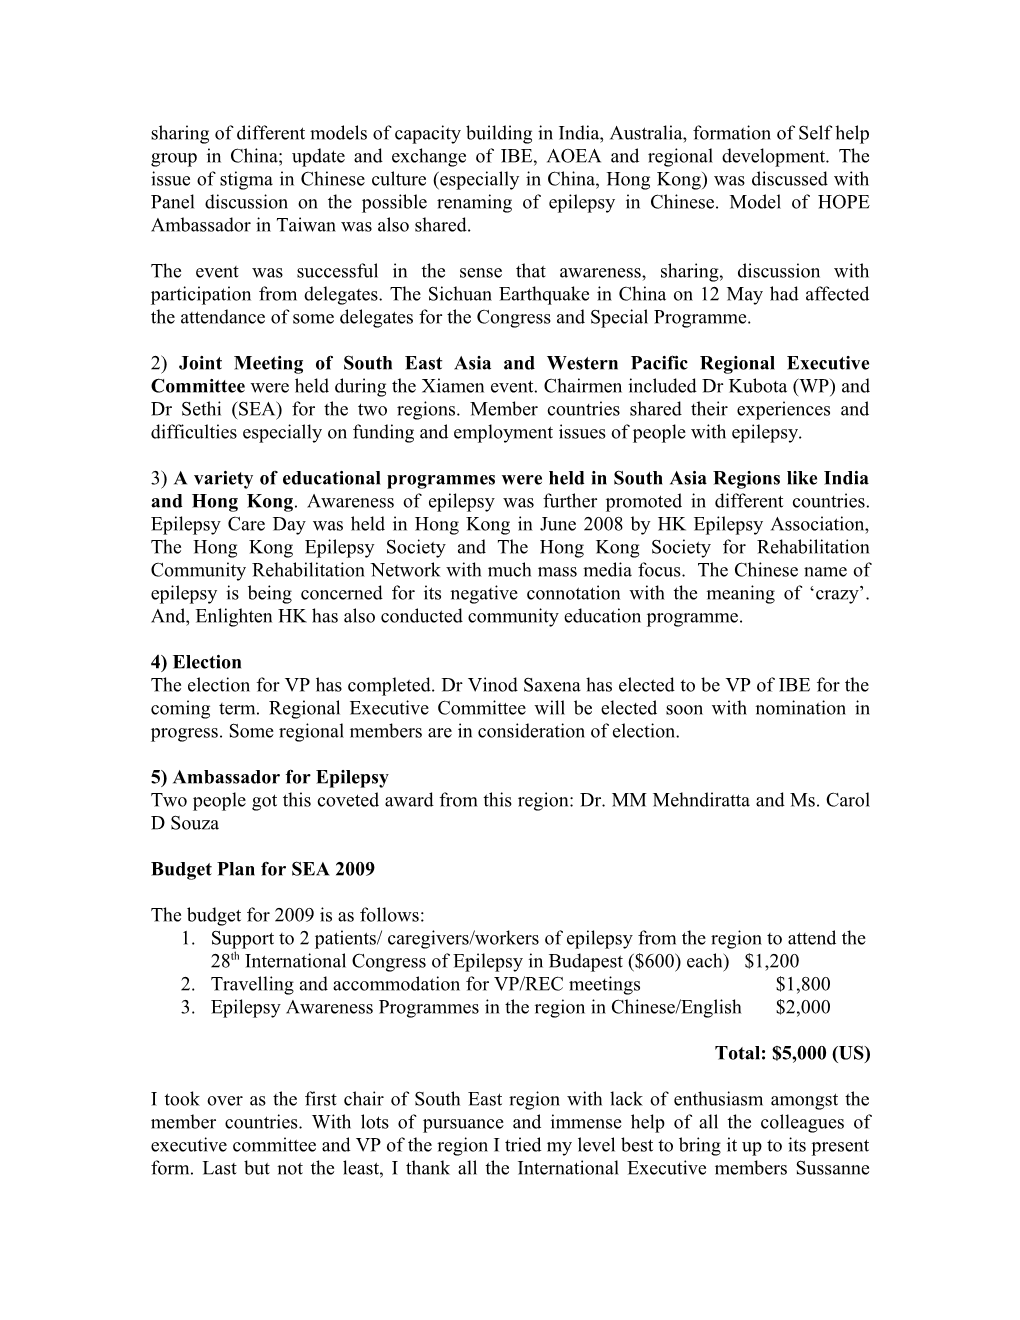 Report to the International Executive Committee for South East Region 2006-2009